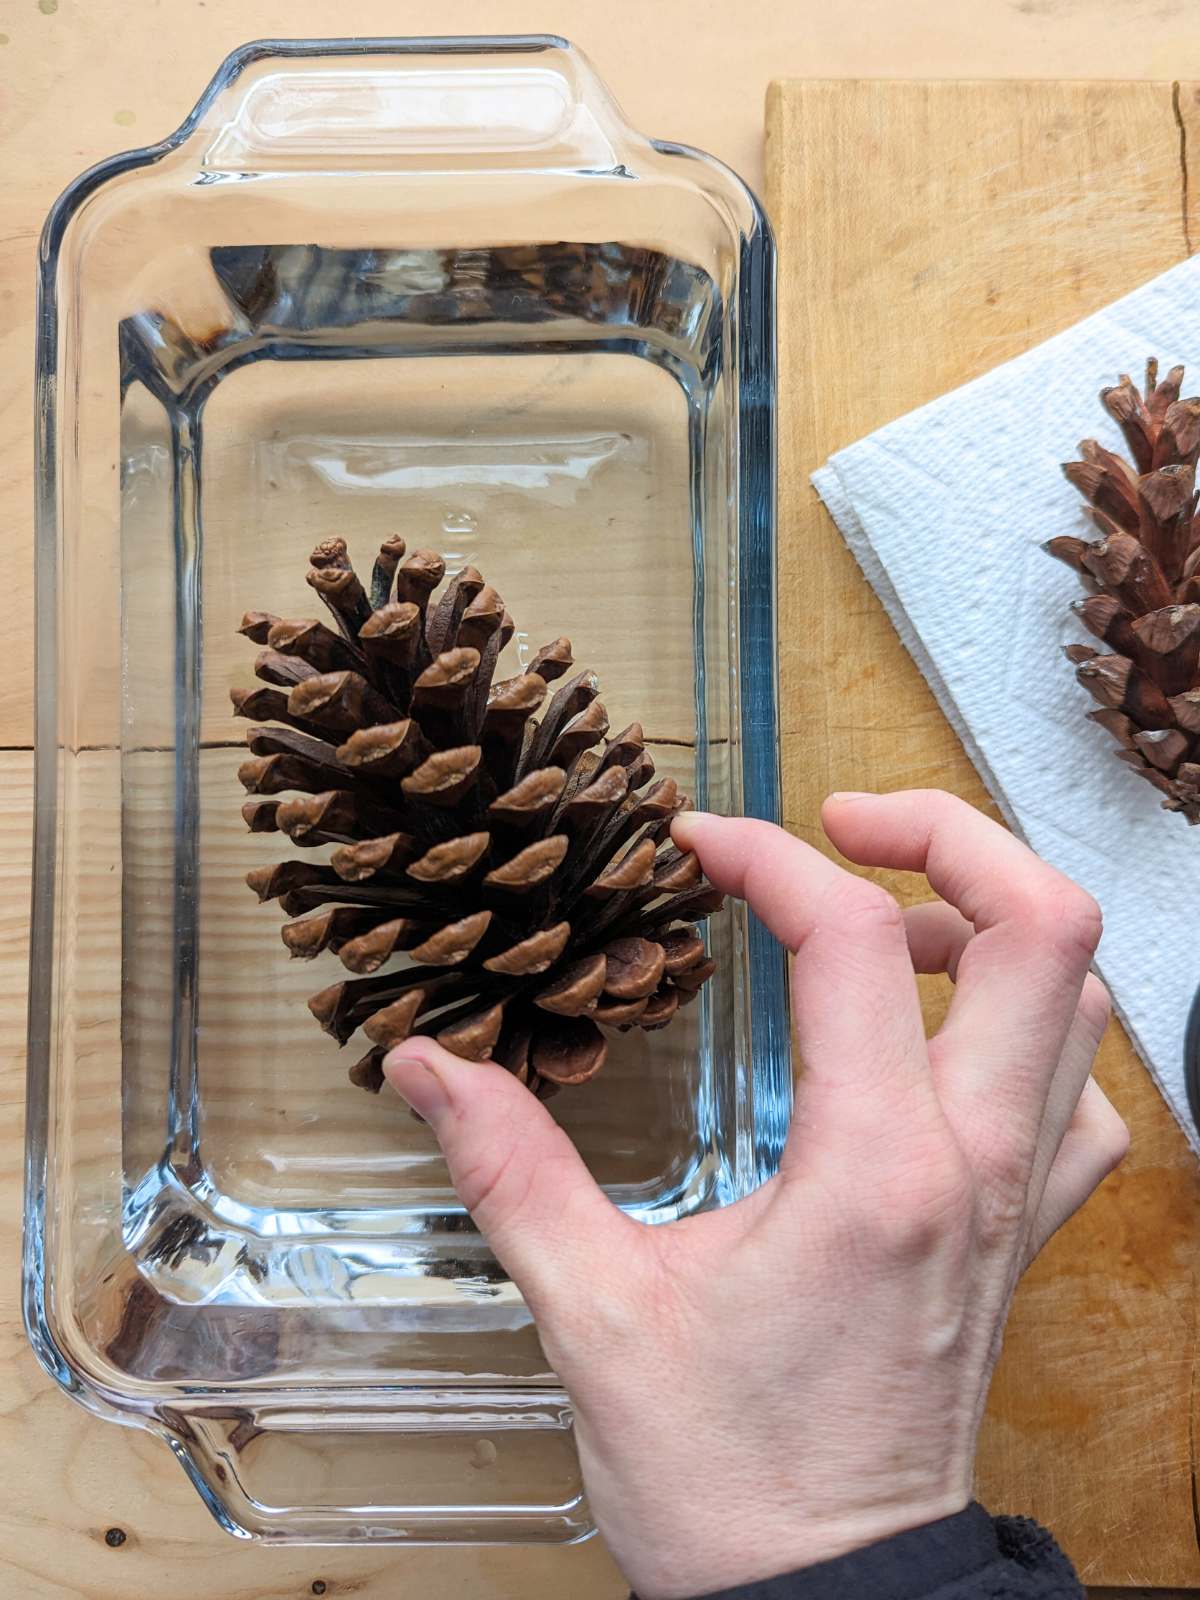 Hand placing a large pinecone into a rectangular glass dish on a wooden surface with a paper towel and second pinecone on the right.